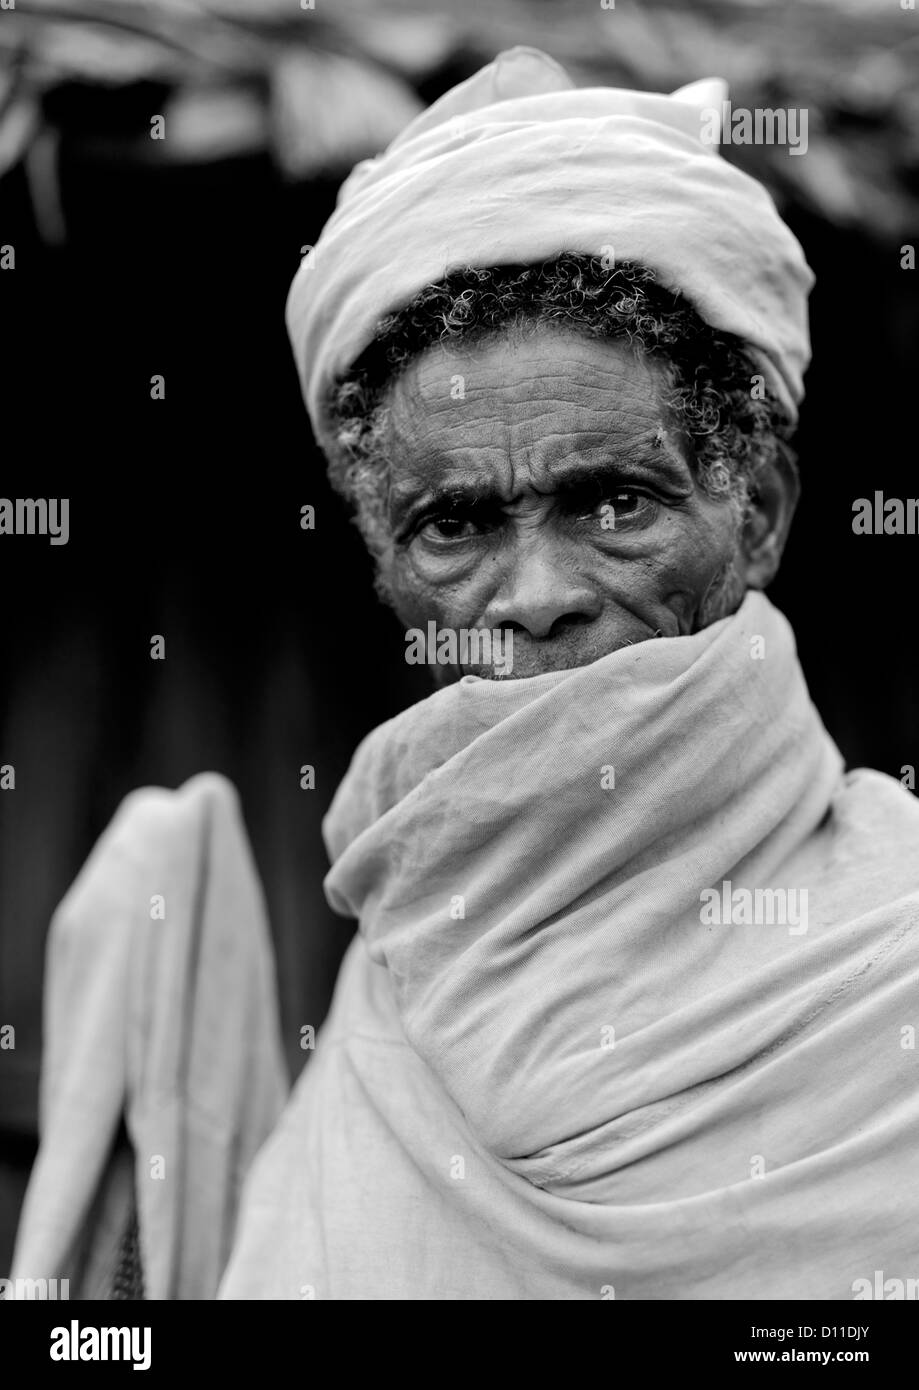 Black And White Portrait Of A Borana Man With Mouth Covered By A White Wrap Around Clothes, Moyale, Ethiopia Stock Photo